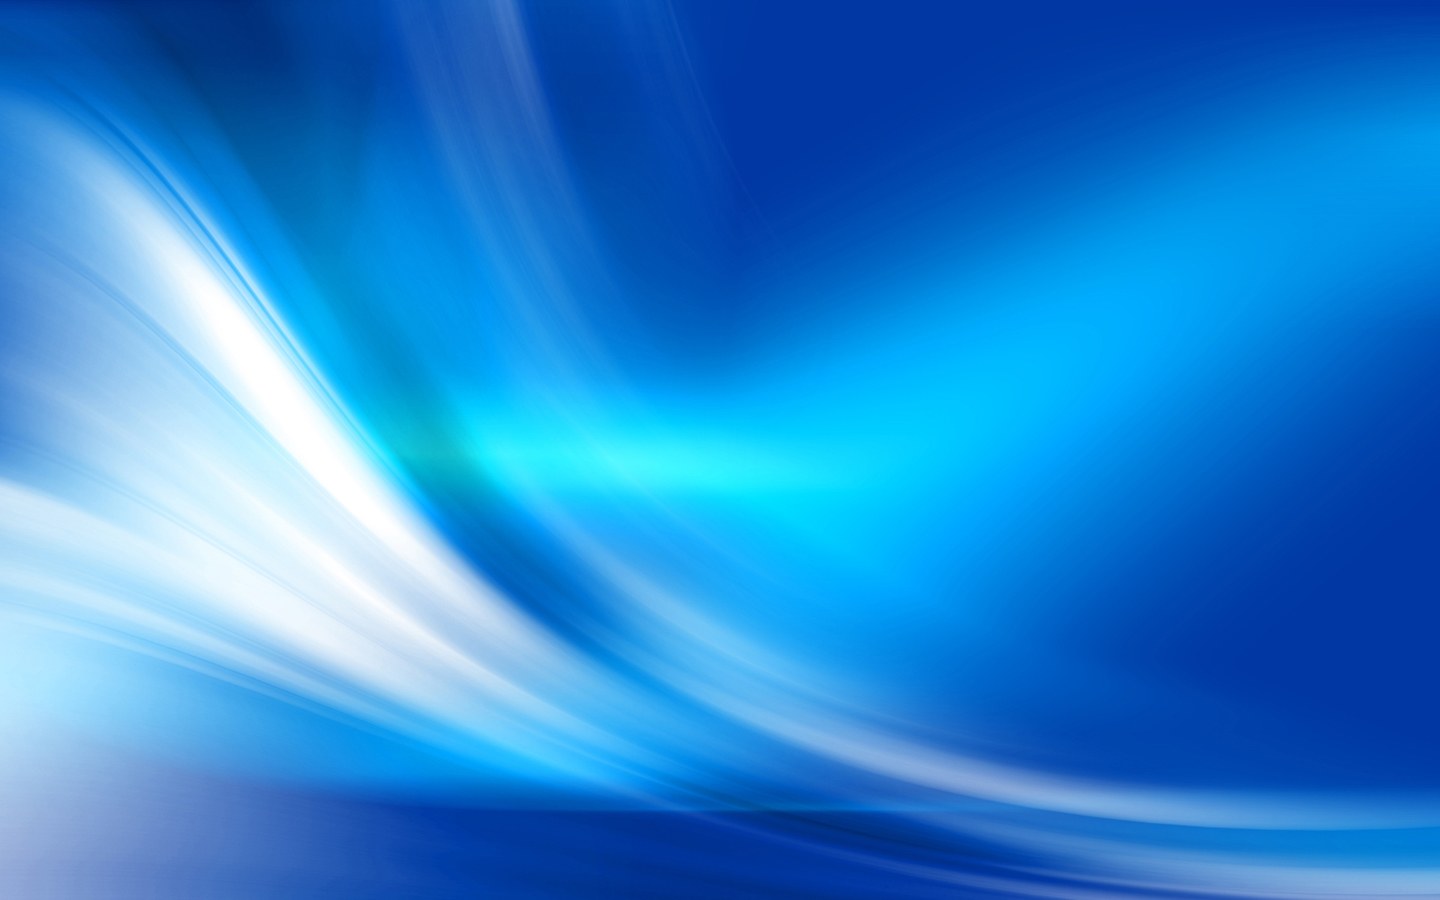 Abstract Light Blue Wallpaper images